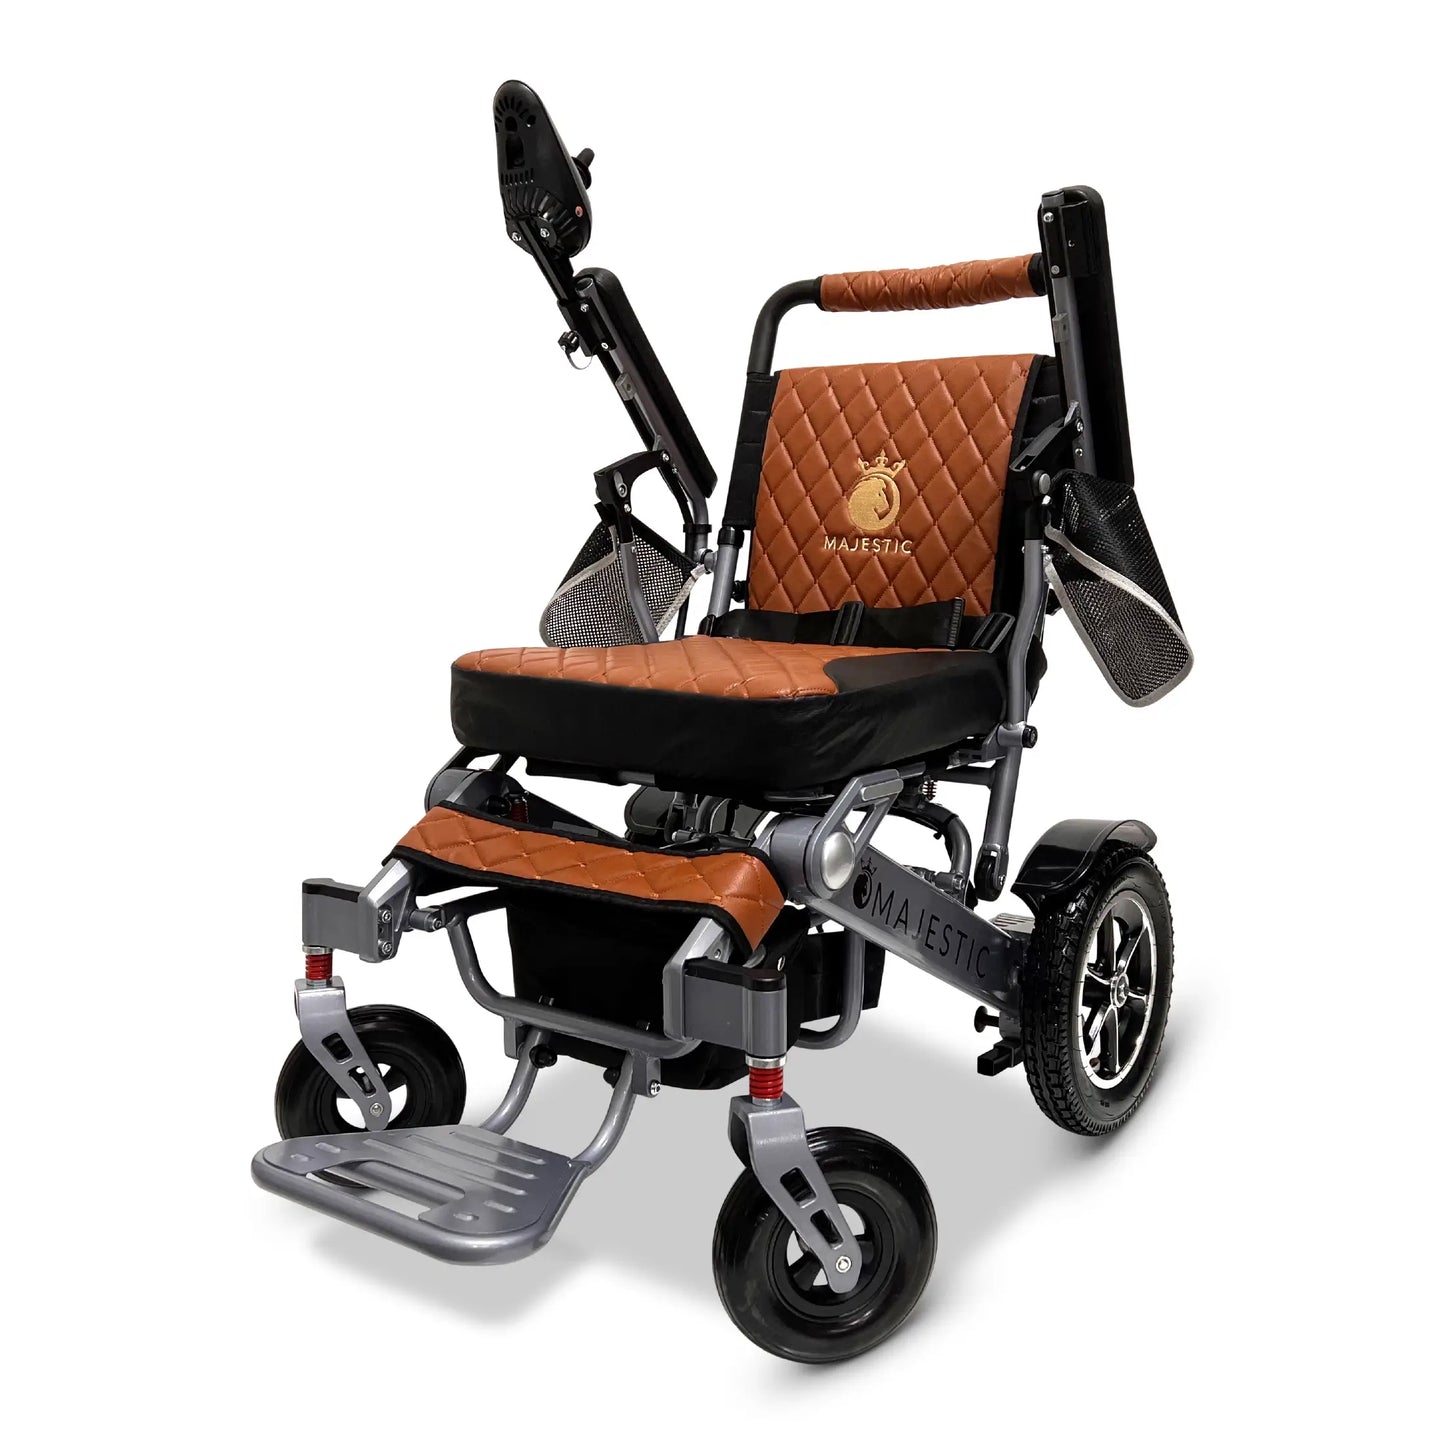 This electric wheelchair comes with a height-adjustable backrest and storage under the seat. 